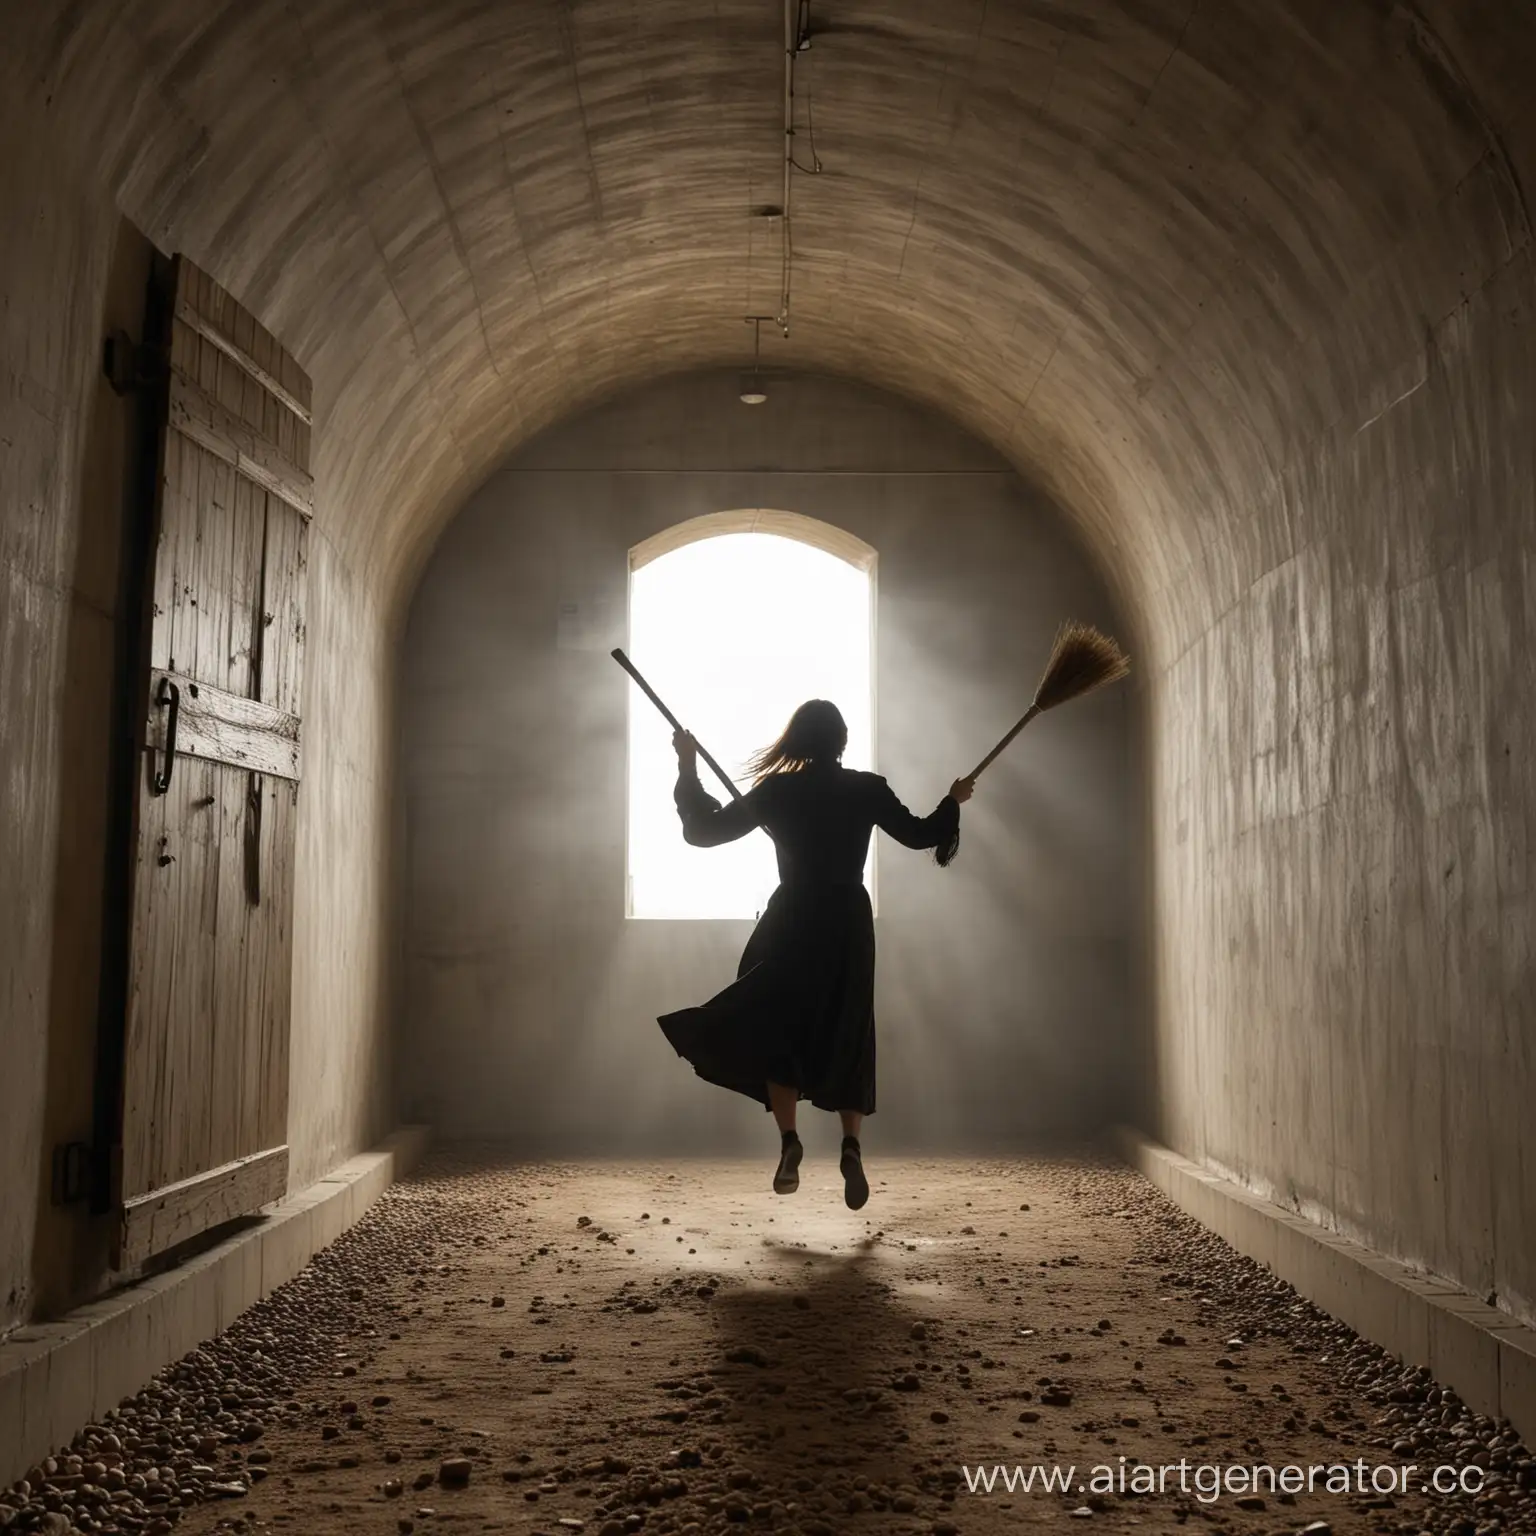 Woman-Flying-on-Broomstick-Enters-Tunnel